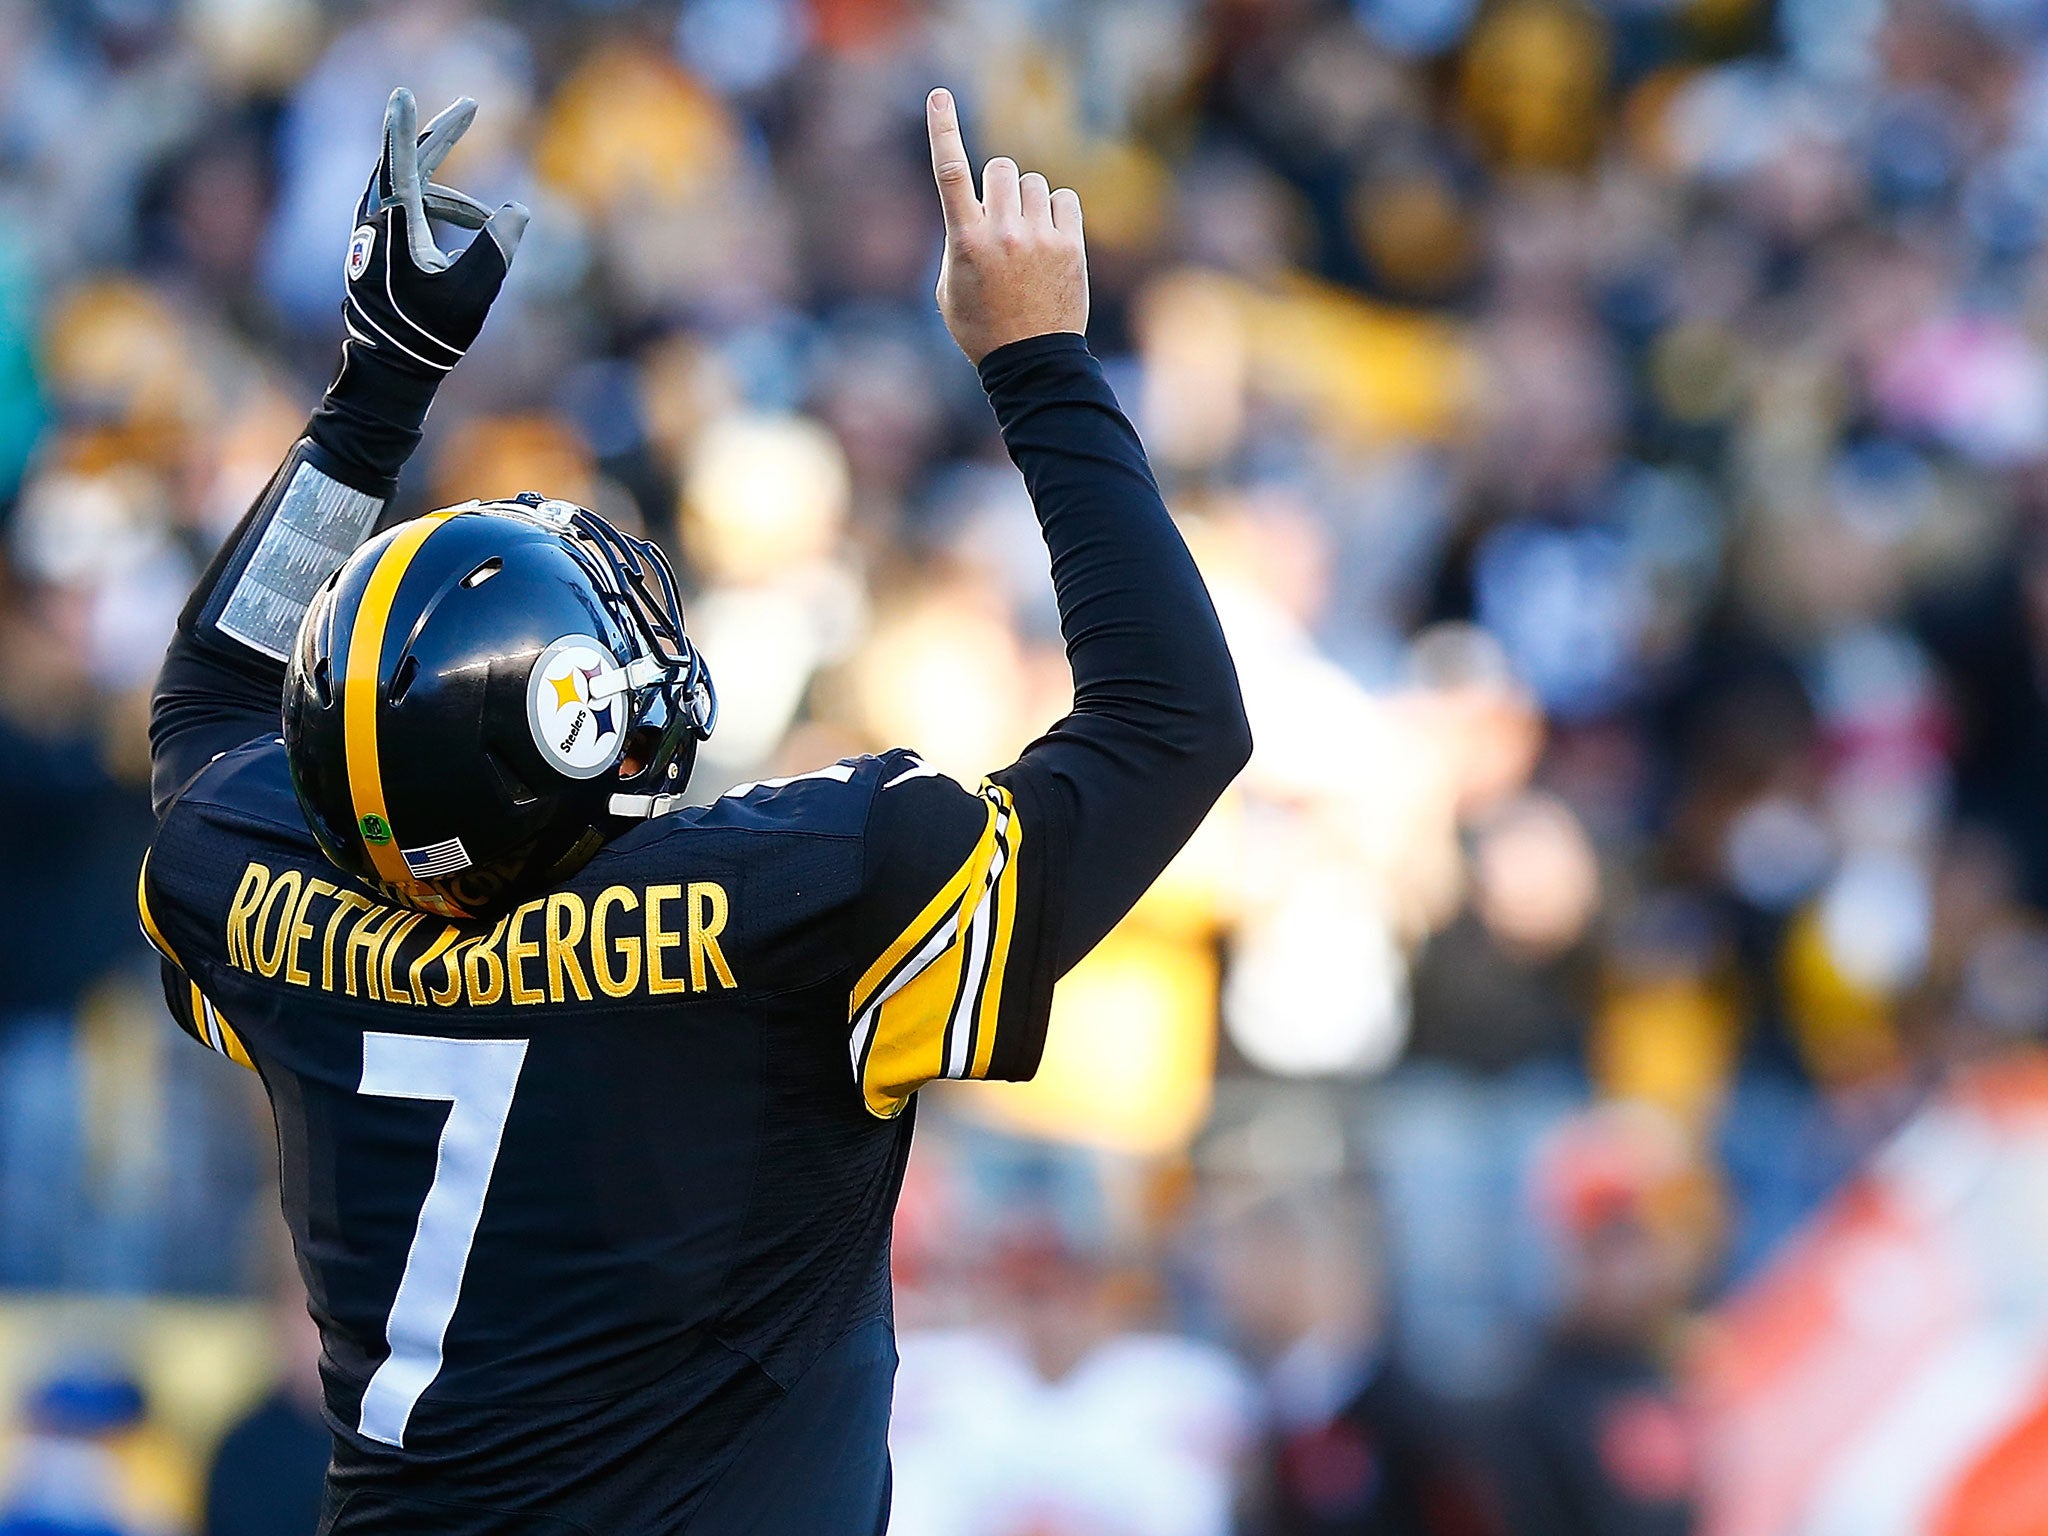 Ben Roethlisburger returned for the Pittsburgh Steelers after suffering a knee injury early in the season